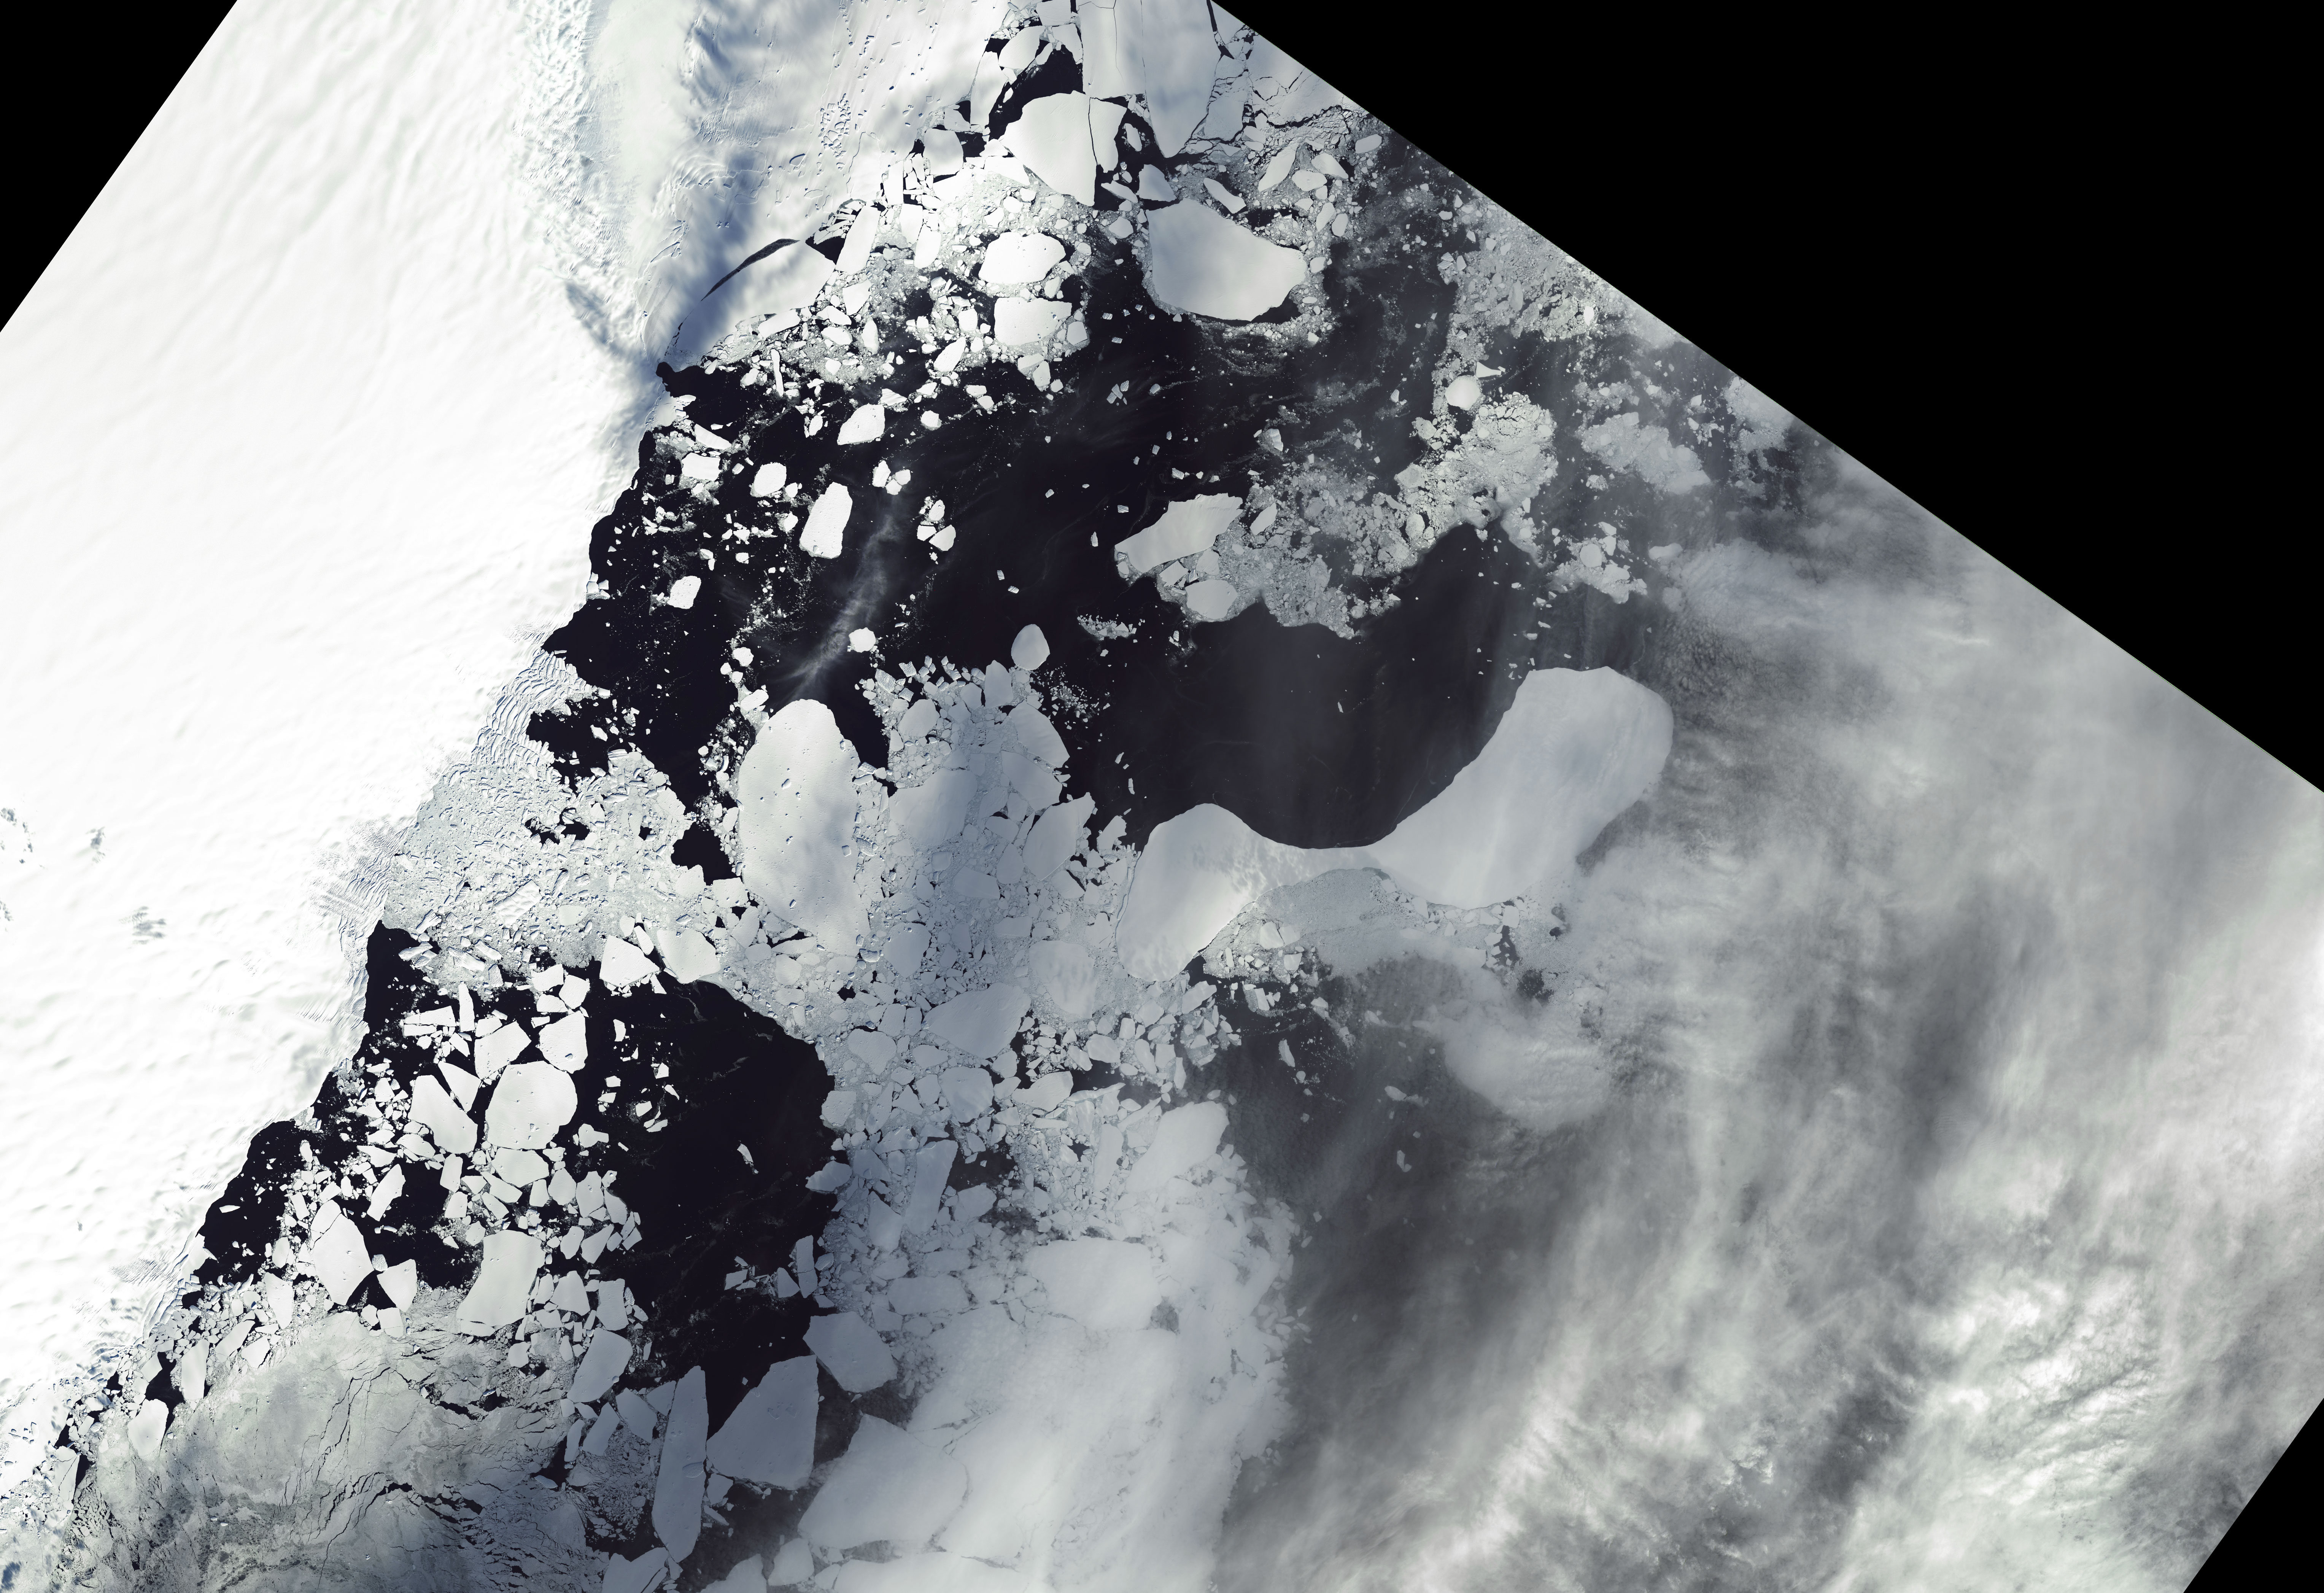 Much of the Glenzer and Conger glaciers had collapsed by March 23, 2022, spawning numerous icebergs, as shown in this satellite image. NISAR will document such changes around the globe, and its geographic coverage of Antarctica will be the most extensive for a radar satellite mission to date.